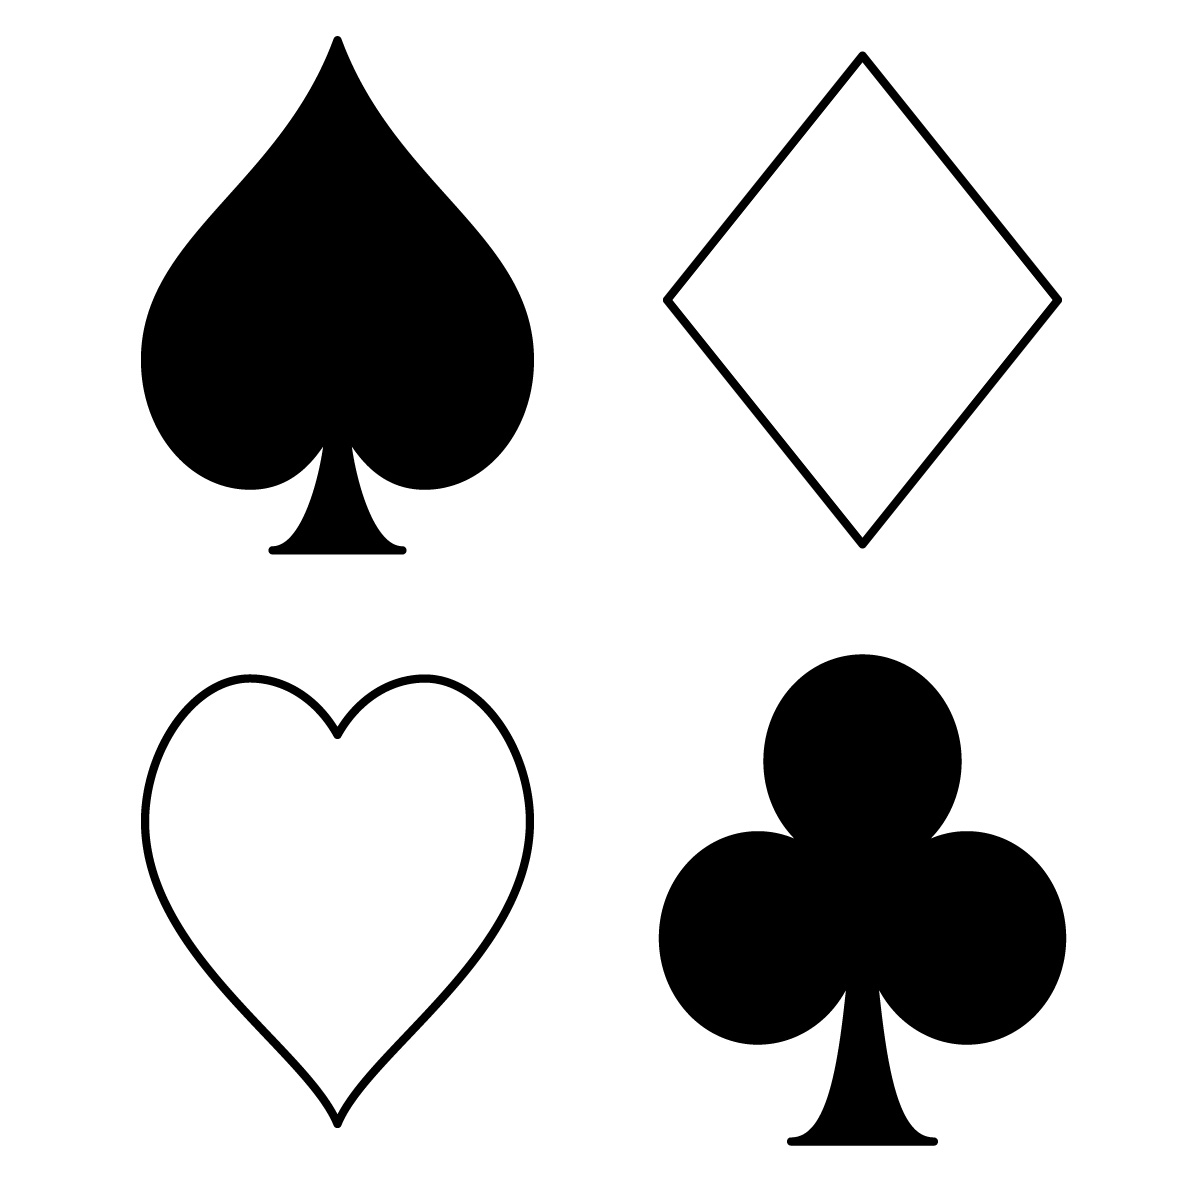 Free Playing Card Pics, Download Free Clip Art, Free Clip Art on